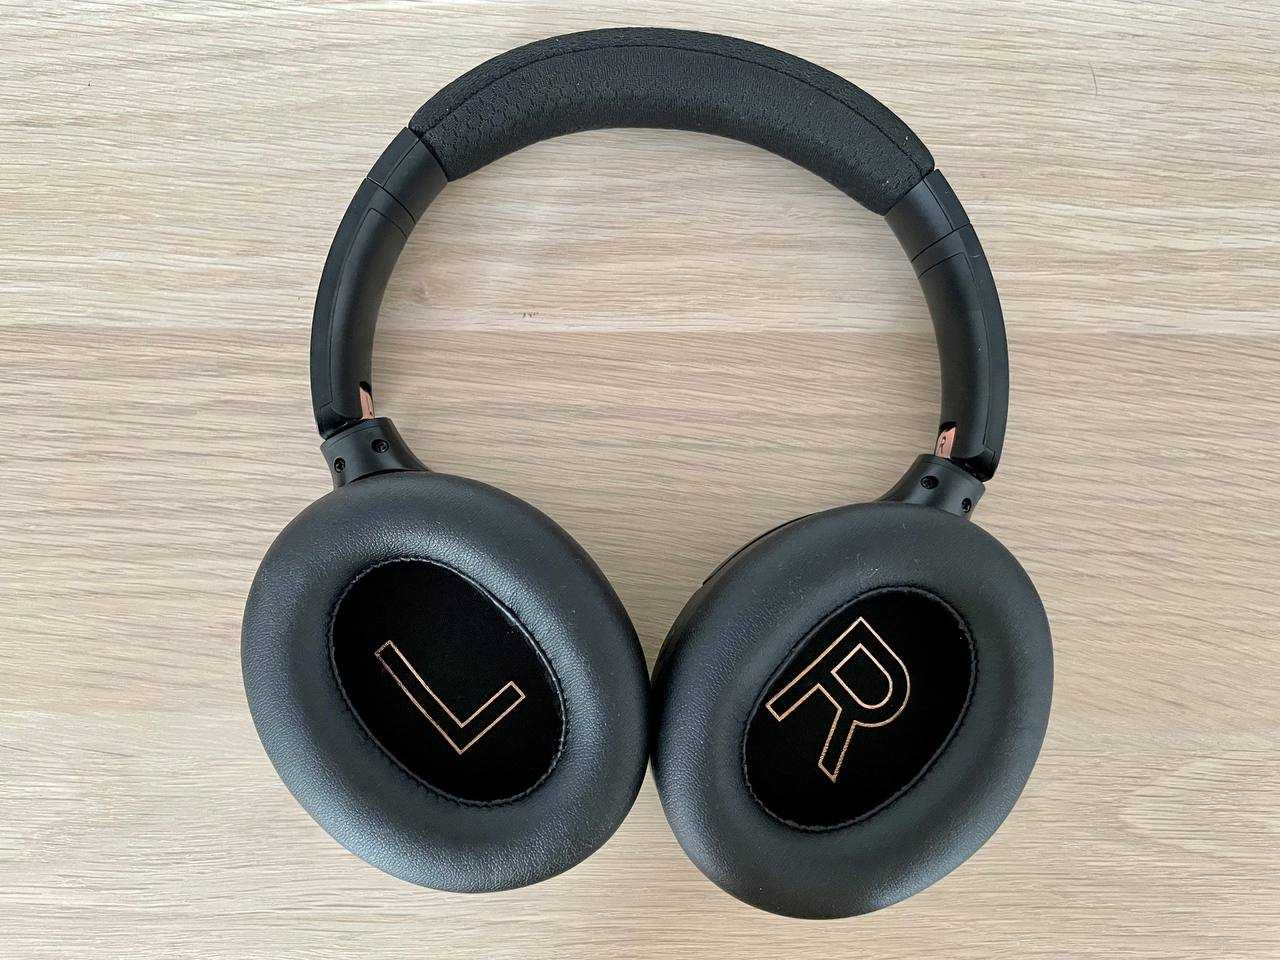 Creative Zen Hybrid Pro review: excellent over-ears with ANC